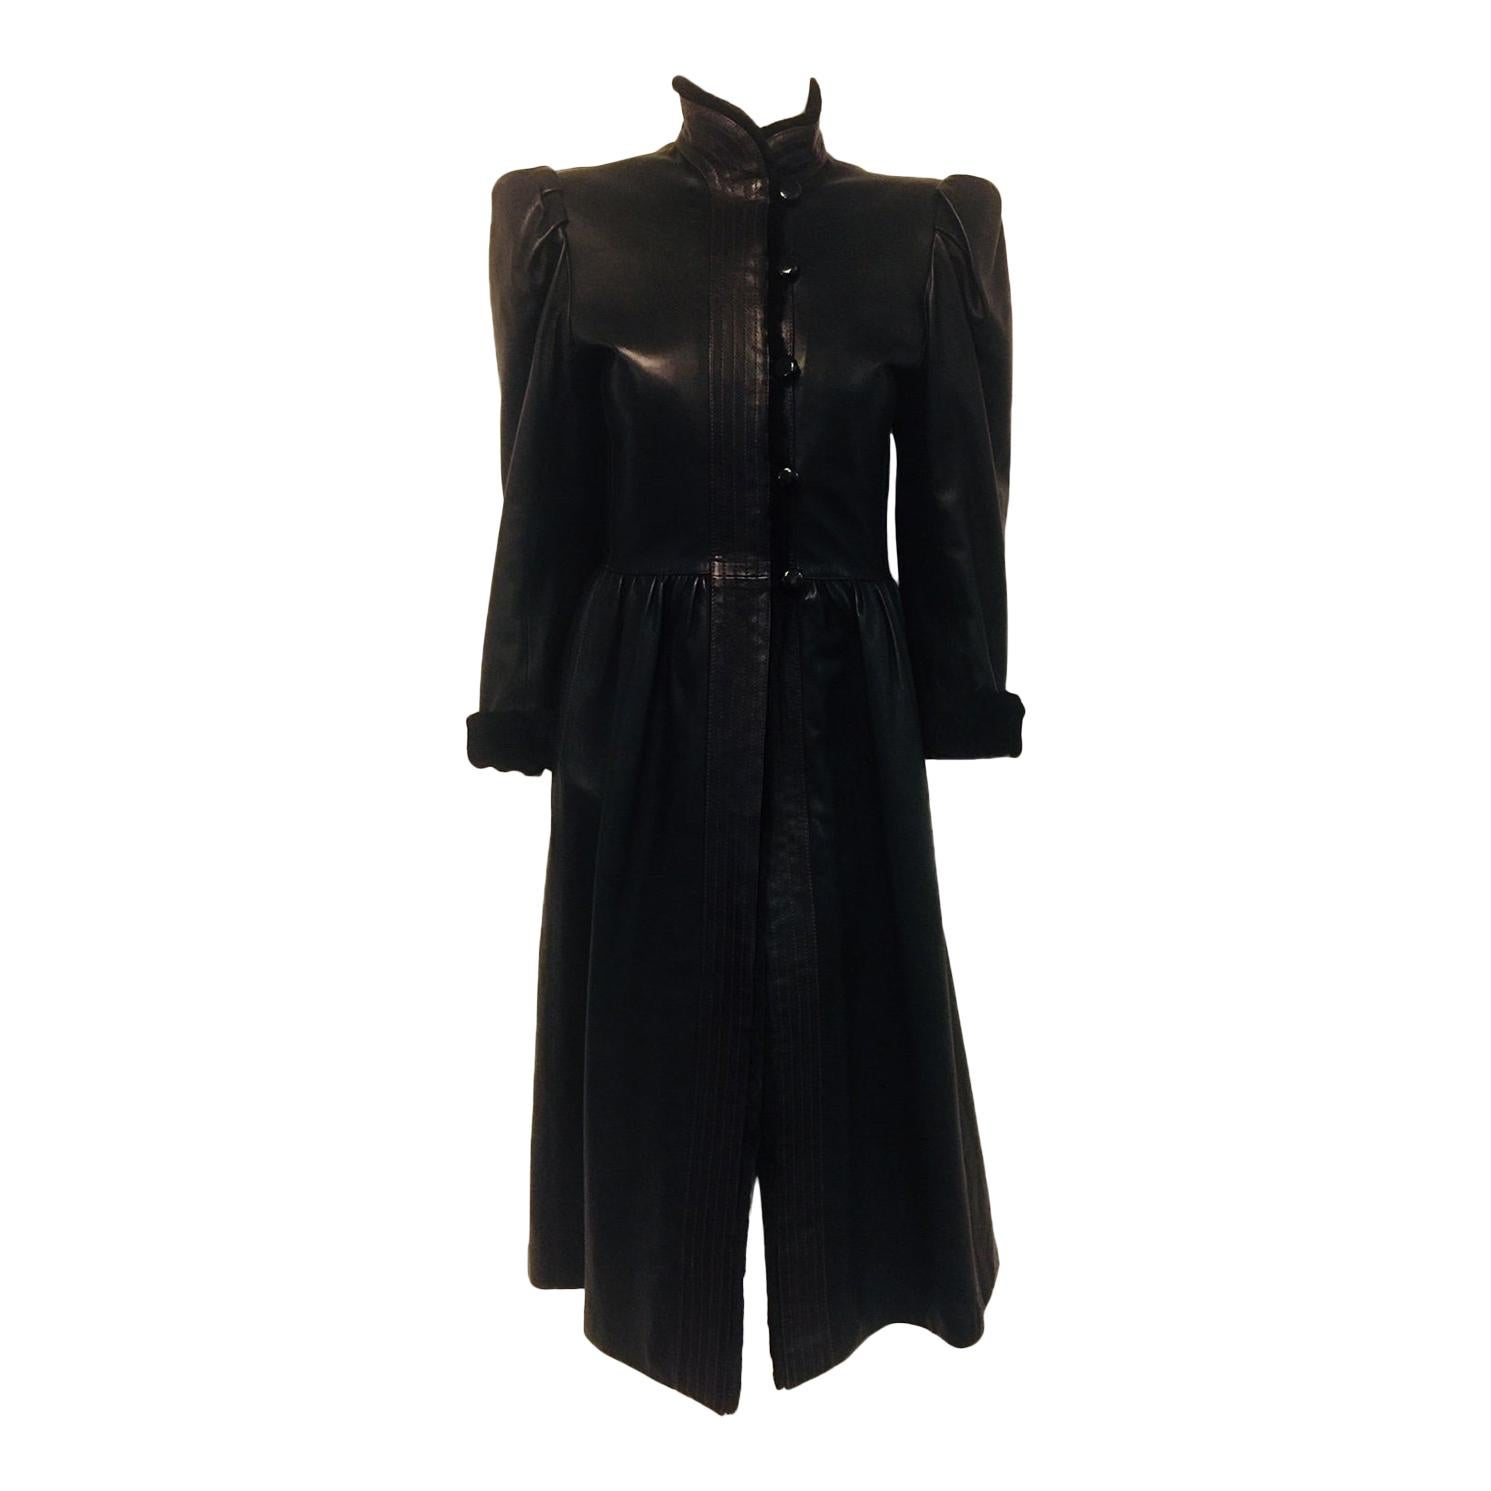   Yves Saint Laurent 1976 Russian Collection Fur & Leather Coat  For Sale